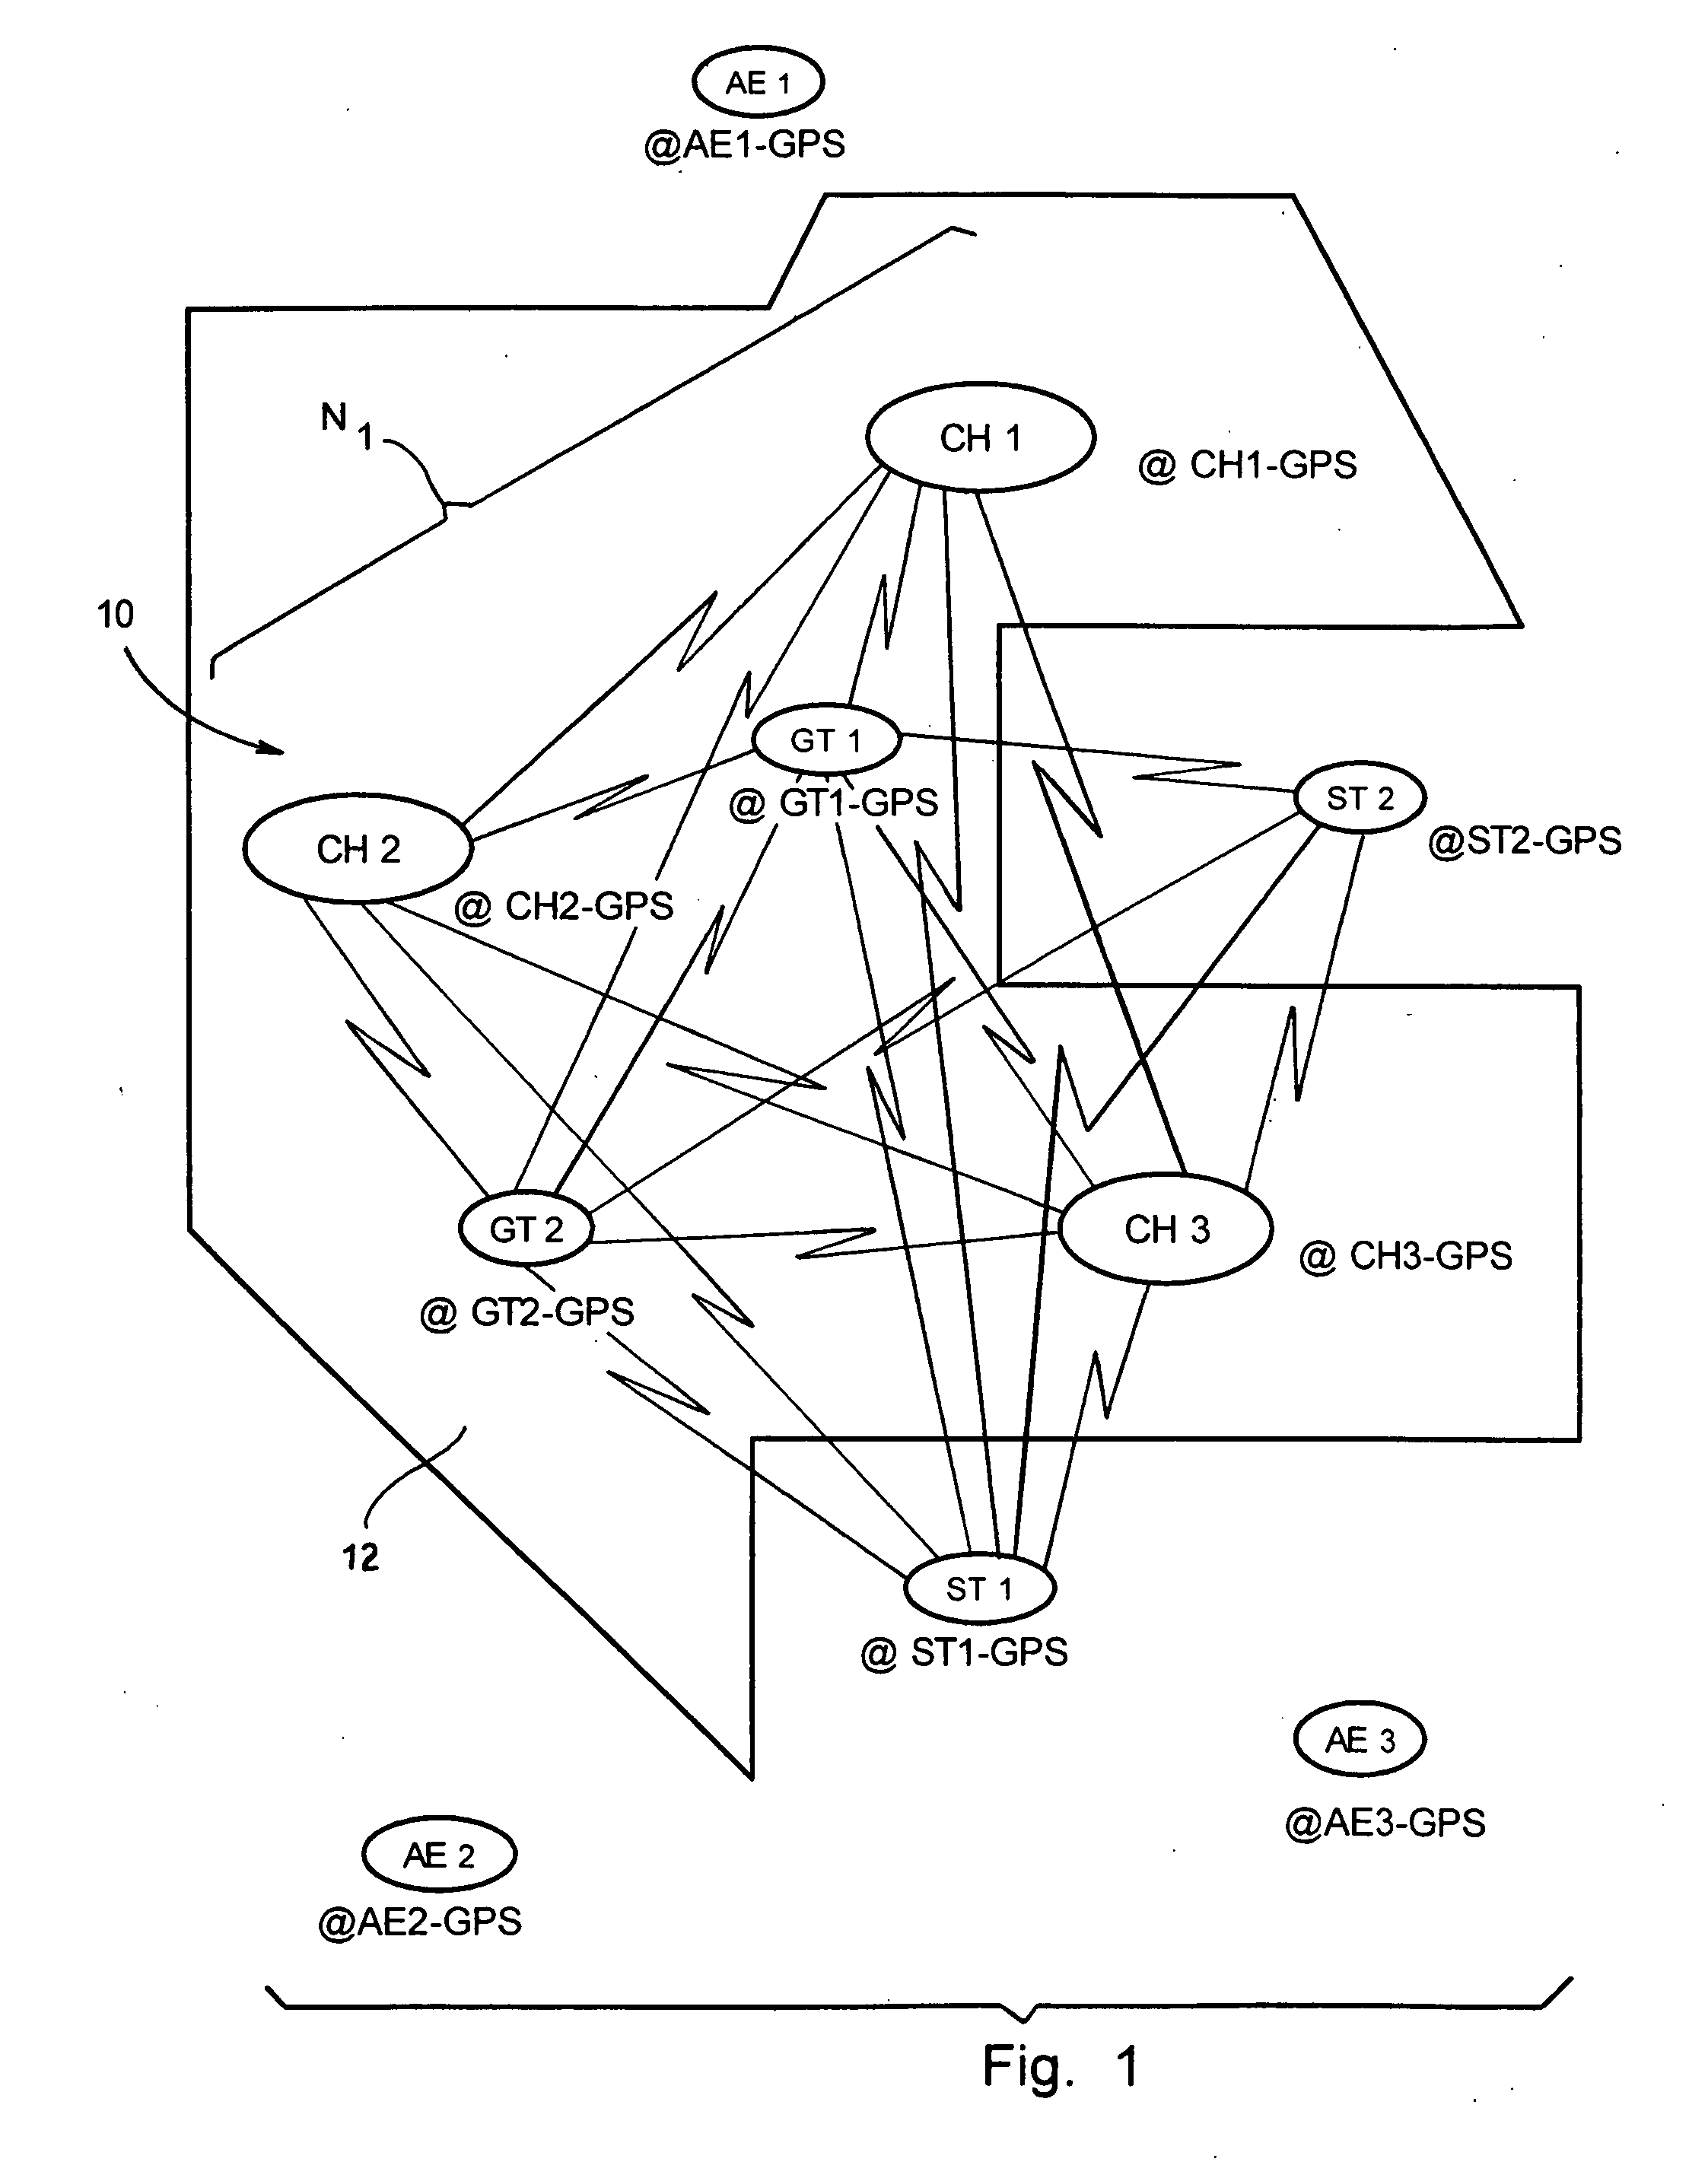 System and method employing short range communications for communicating and exchanging operational and logistical status information among a plurality of agricultural machines